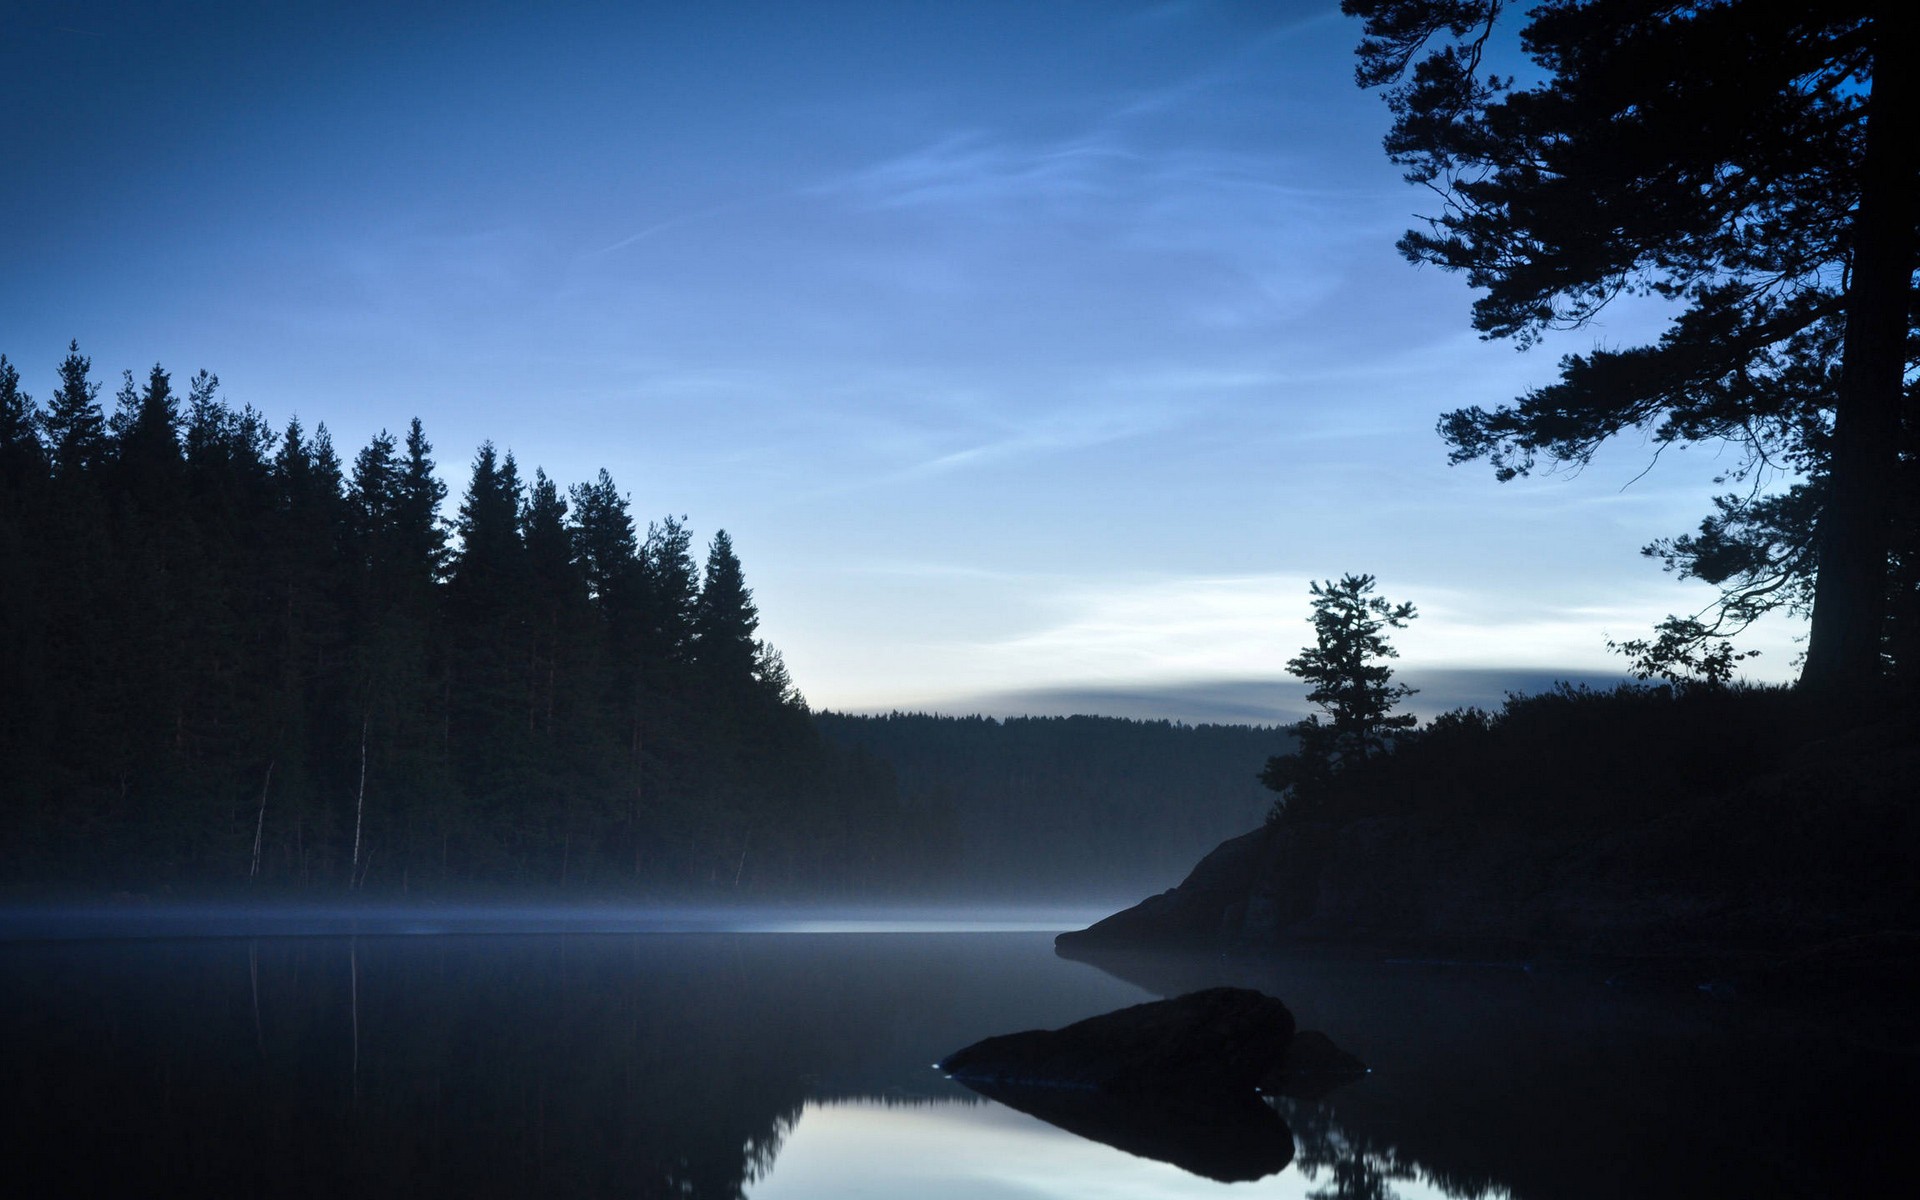 General 1920x1200 nature evening blue lake calm water reflection pine trees trees forest silhouette morning low light